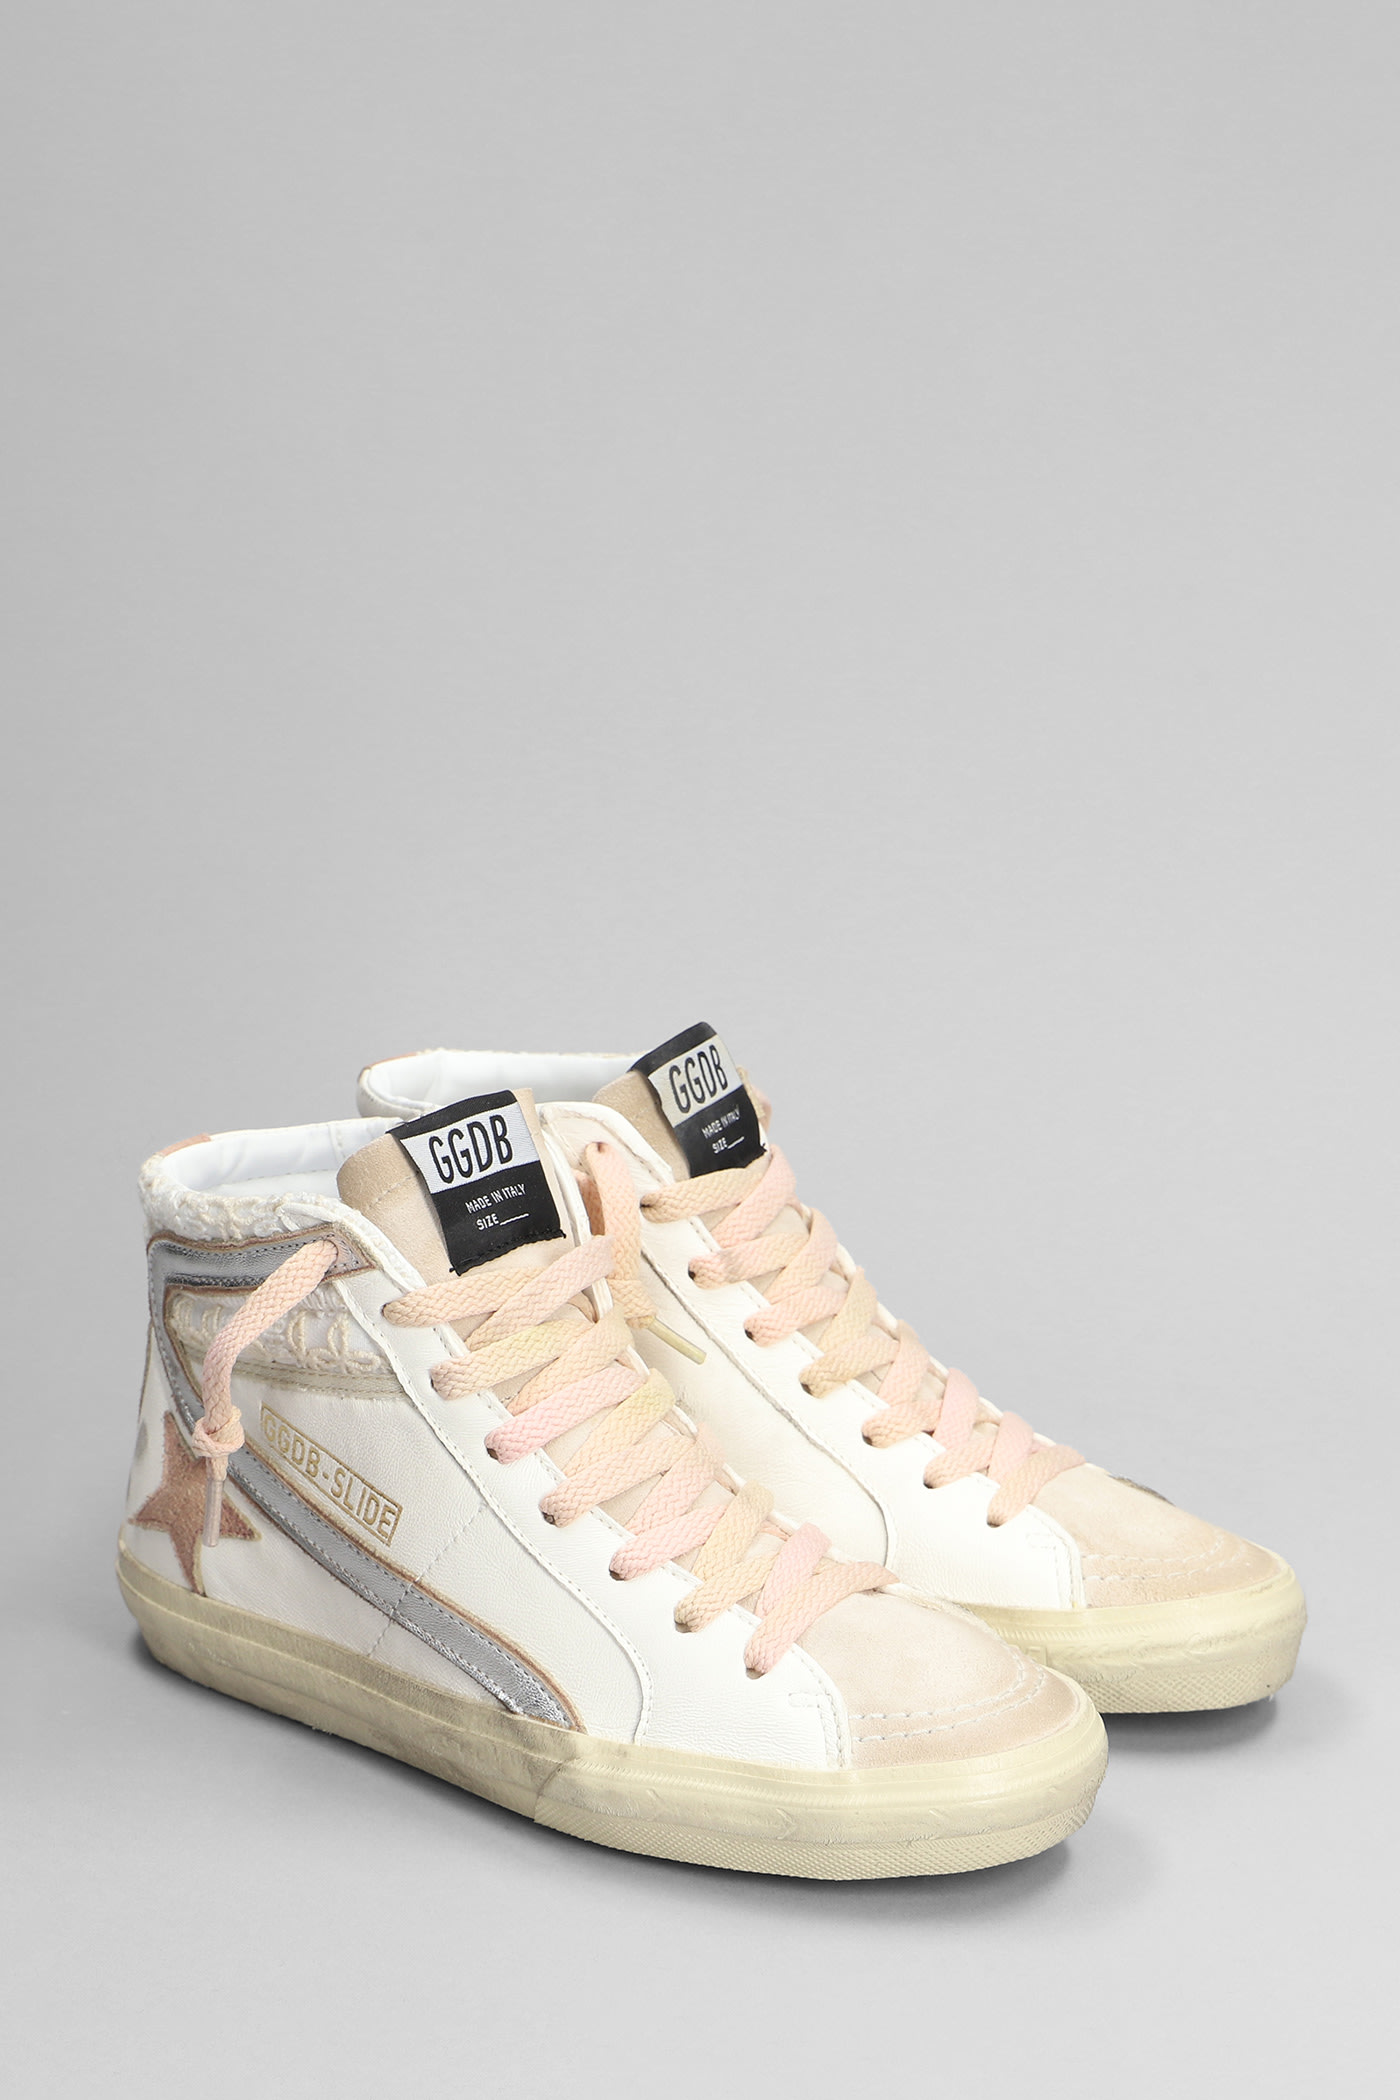 Shop Golden Goose Slide Sneakers In White Suede And Leather